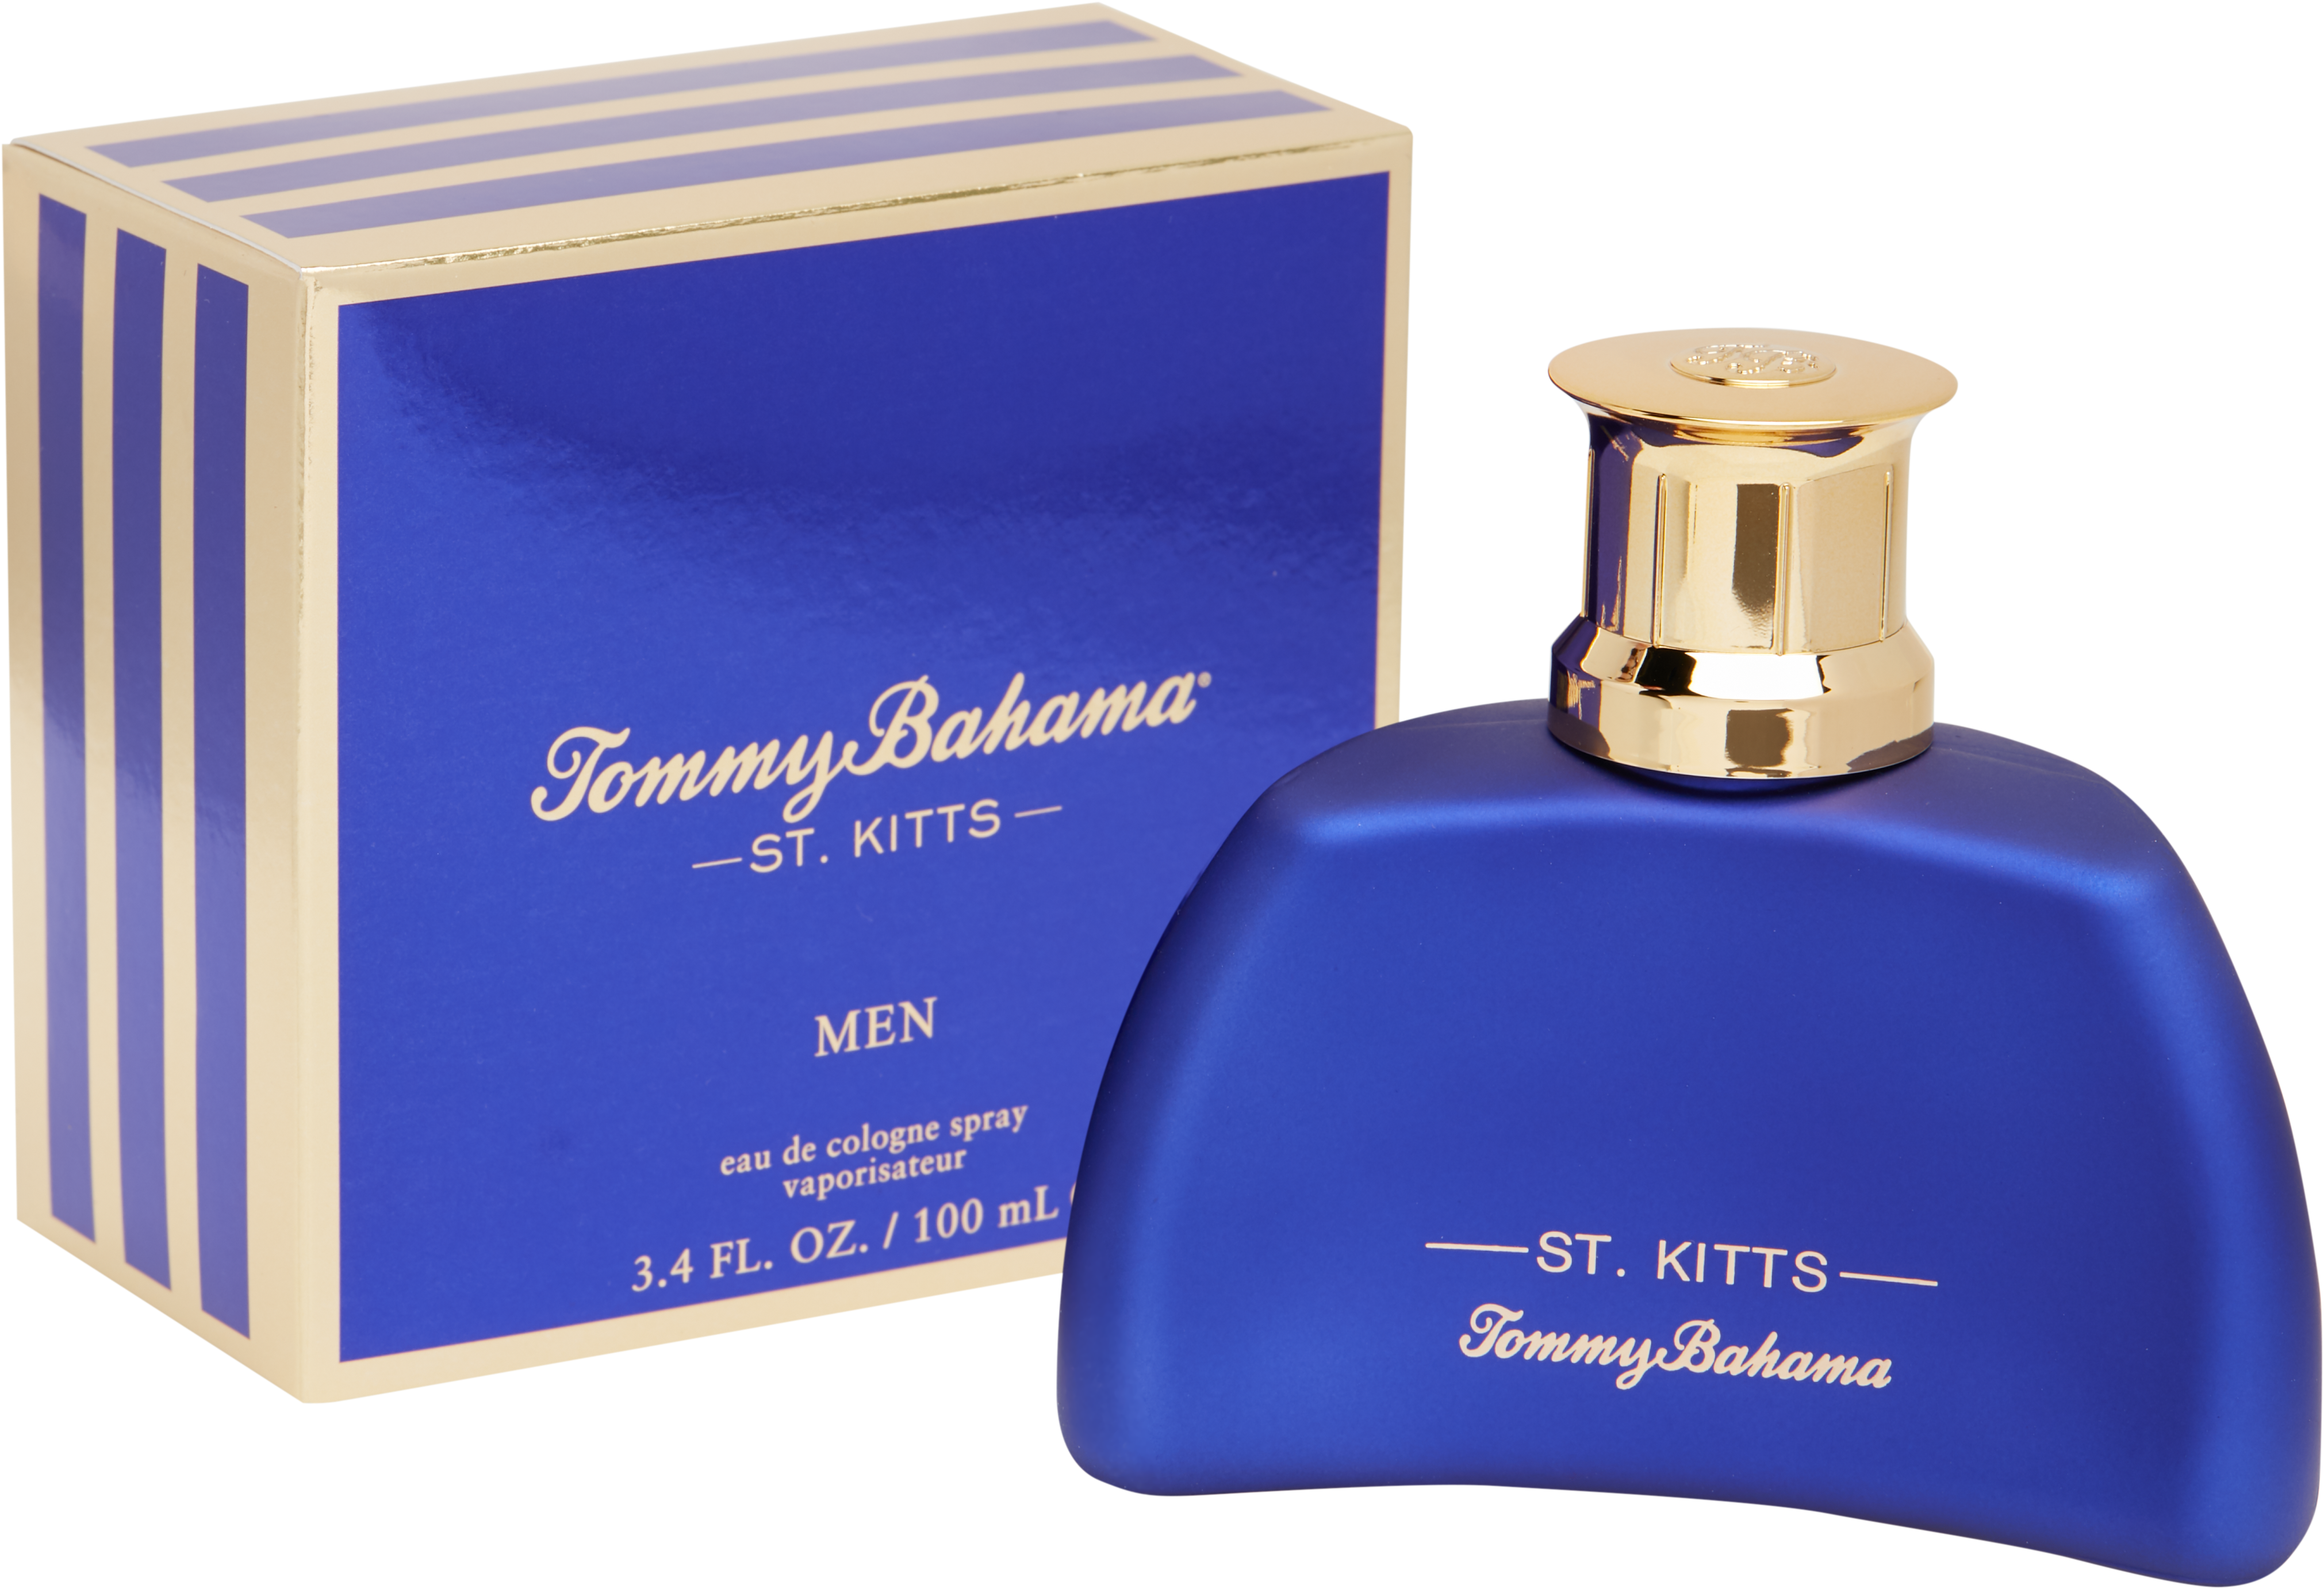 tommy bahama st kitts cologne